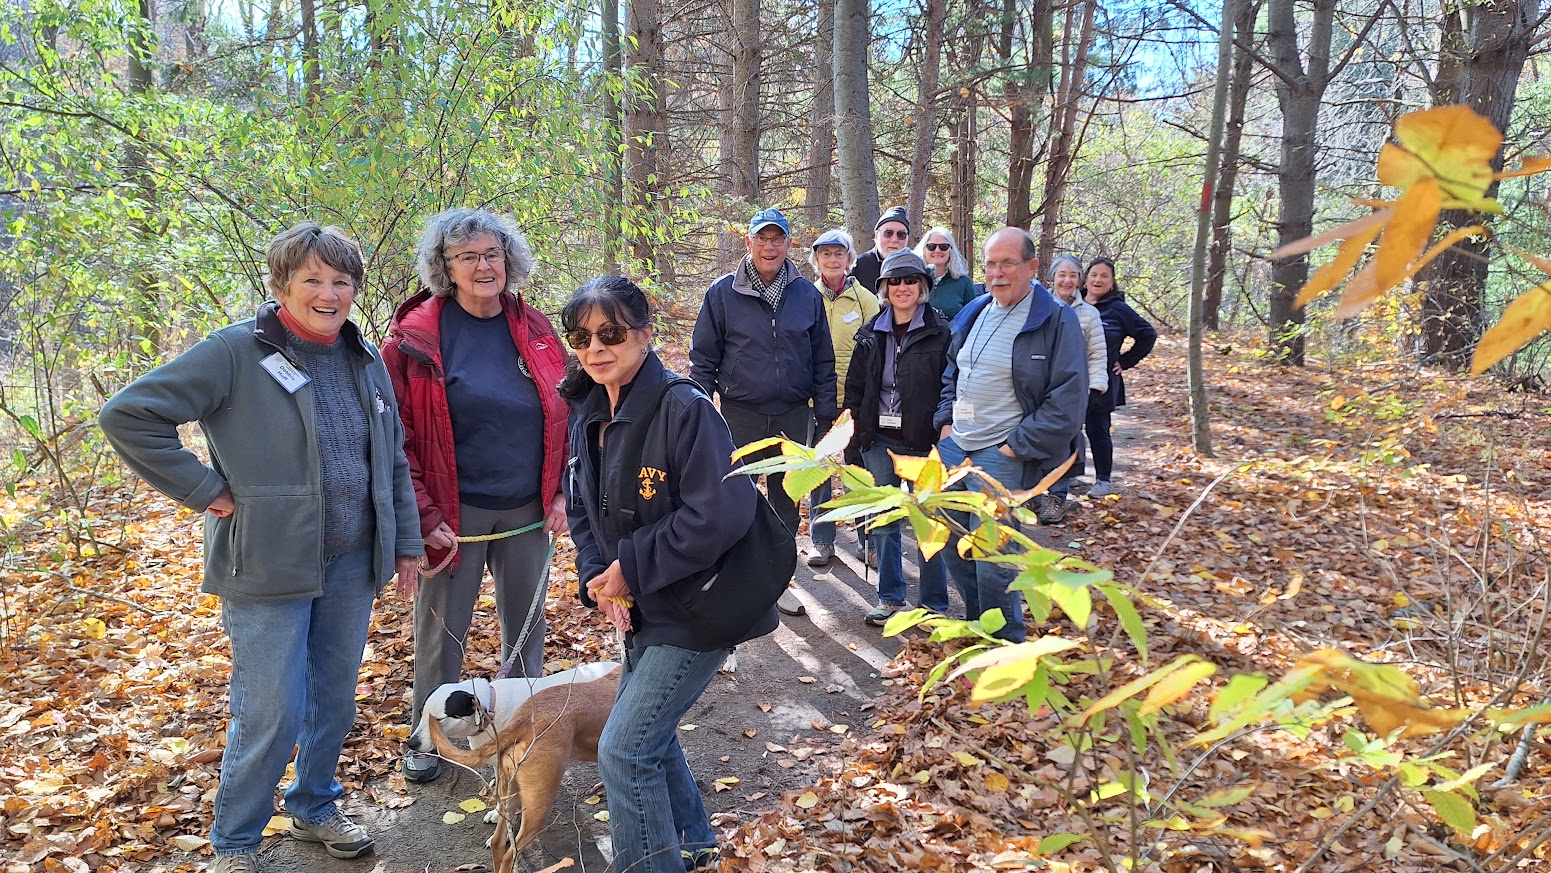 Osher members in the Walking SIG on a park trail